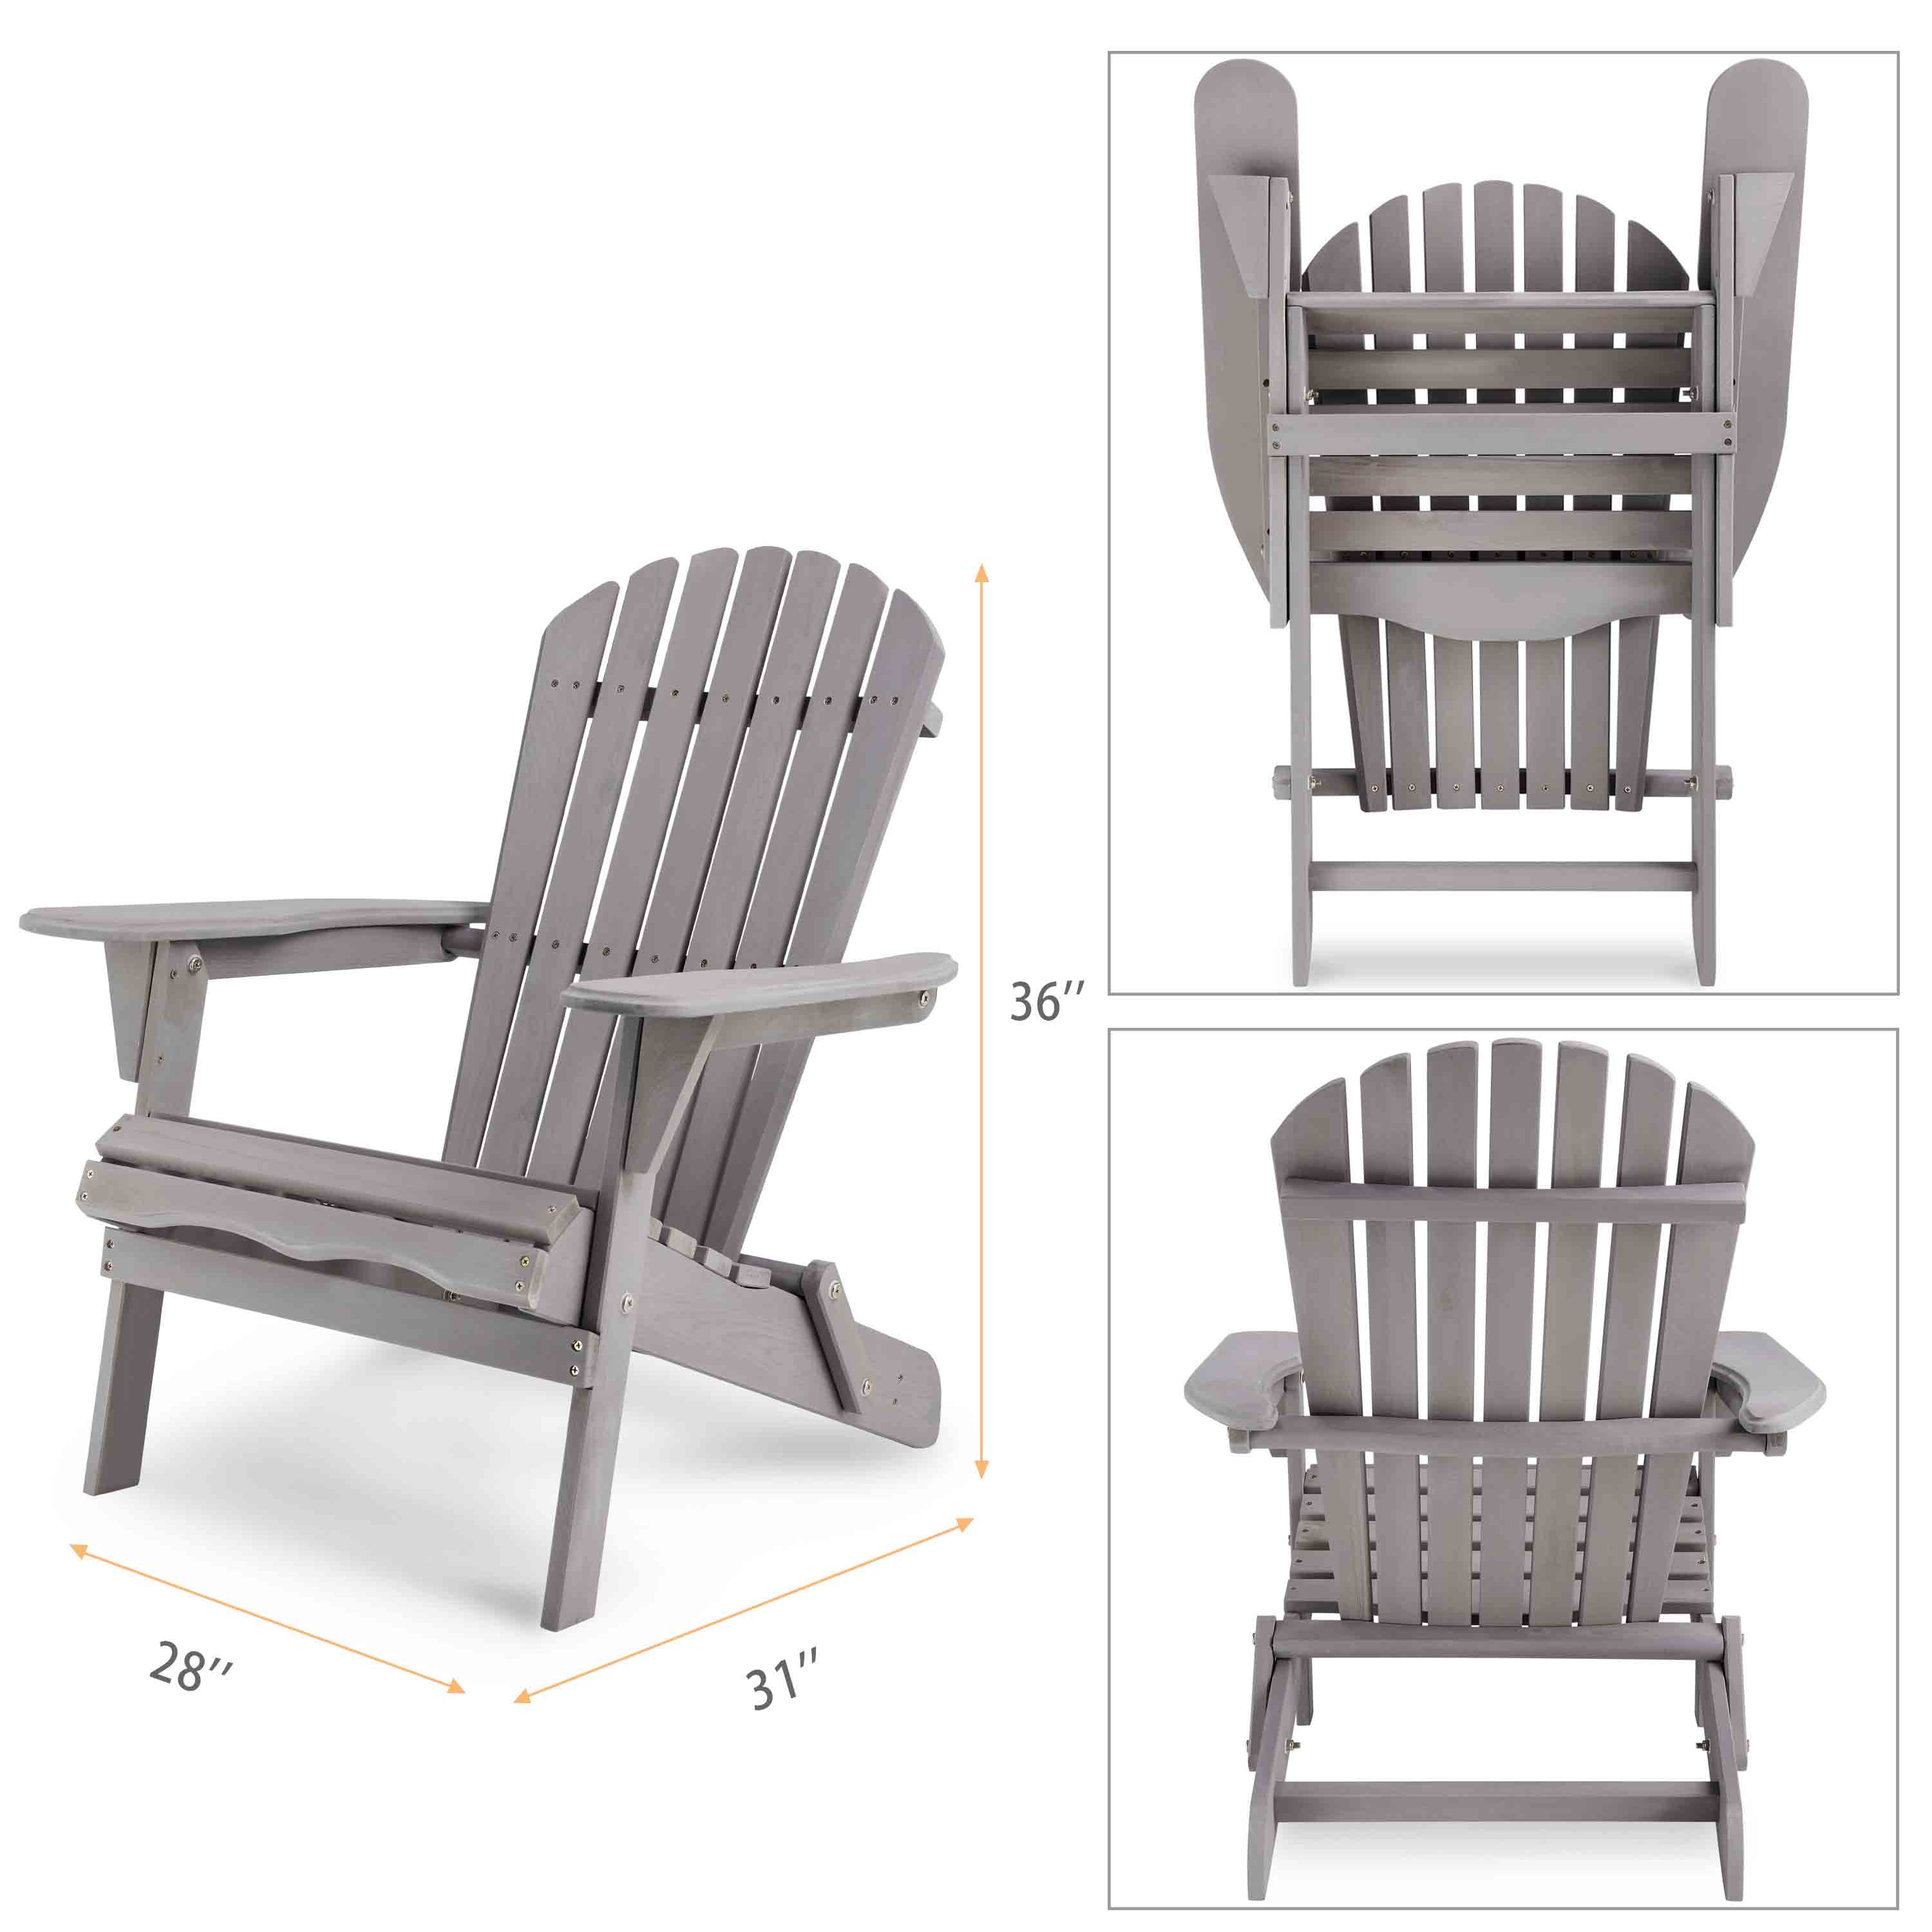 Wooden Leisure Patio Chair Garden Outdoor Wooden Folding Adirondack Chairs 2 Piece Solid Cedar Leisure Patio Chairs for Garden, Lawn, Backyard, Length 28"*W31"*H36" - image 4 of 7